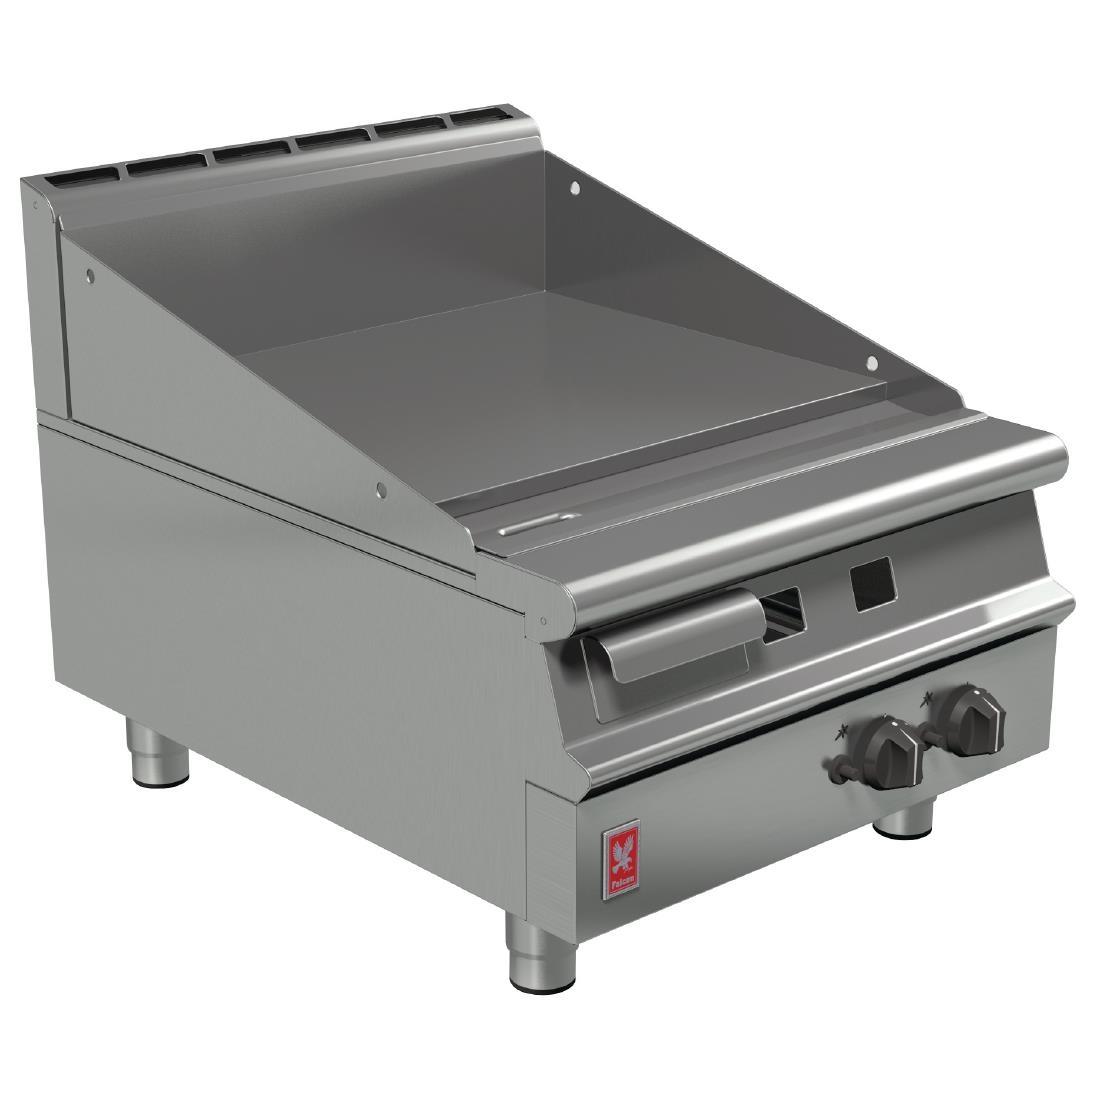 Falcon Dominator Plus 600mm Wide Smooth Natural Gas Griddle G3641 - GP041-N  - 1